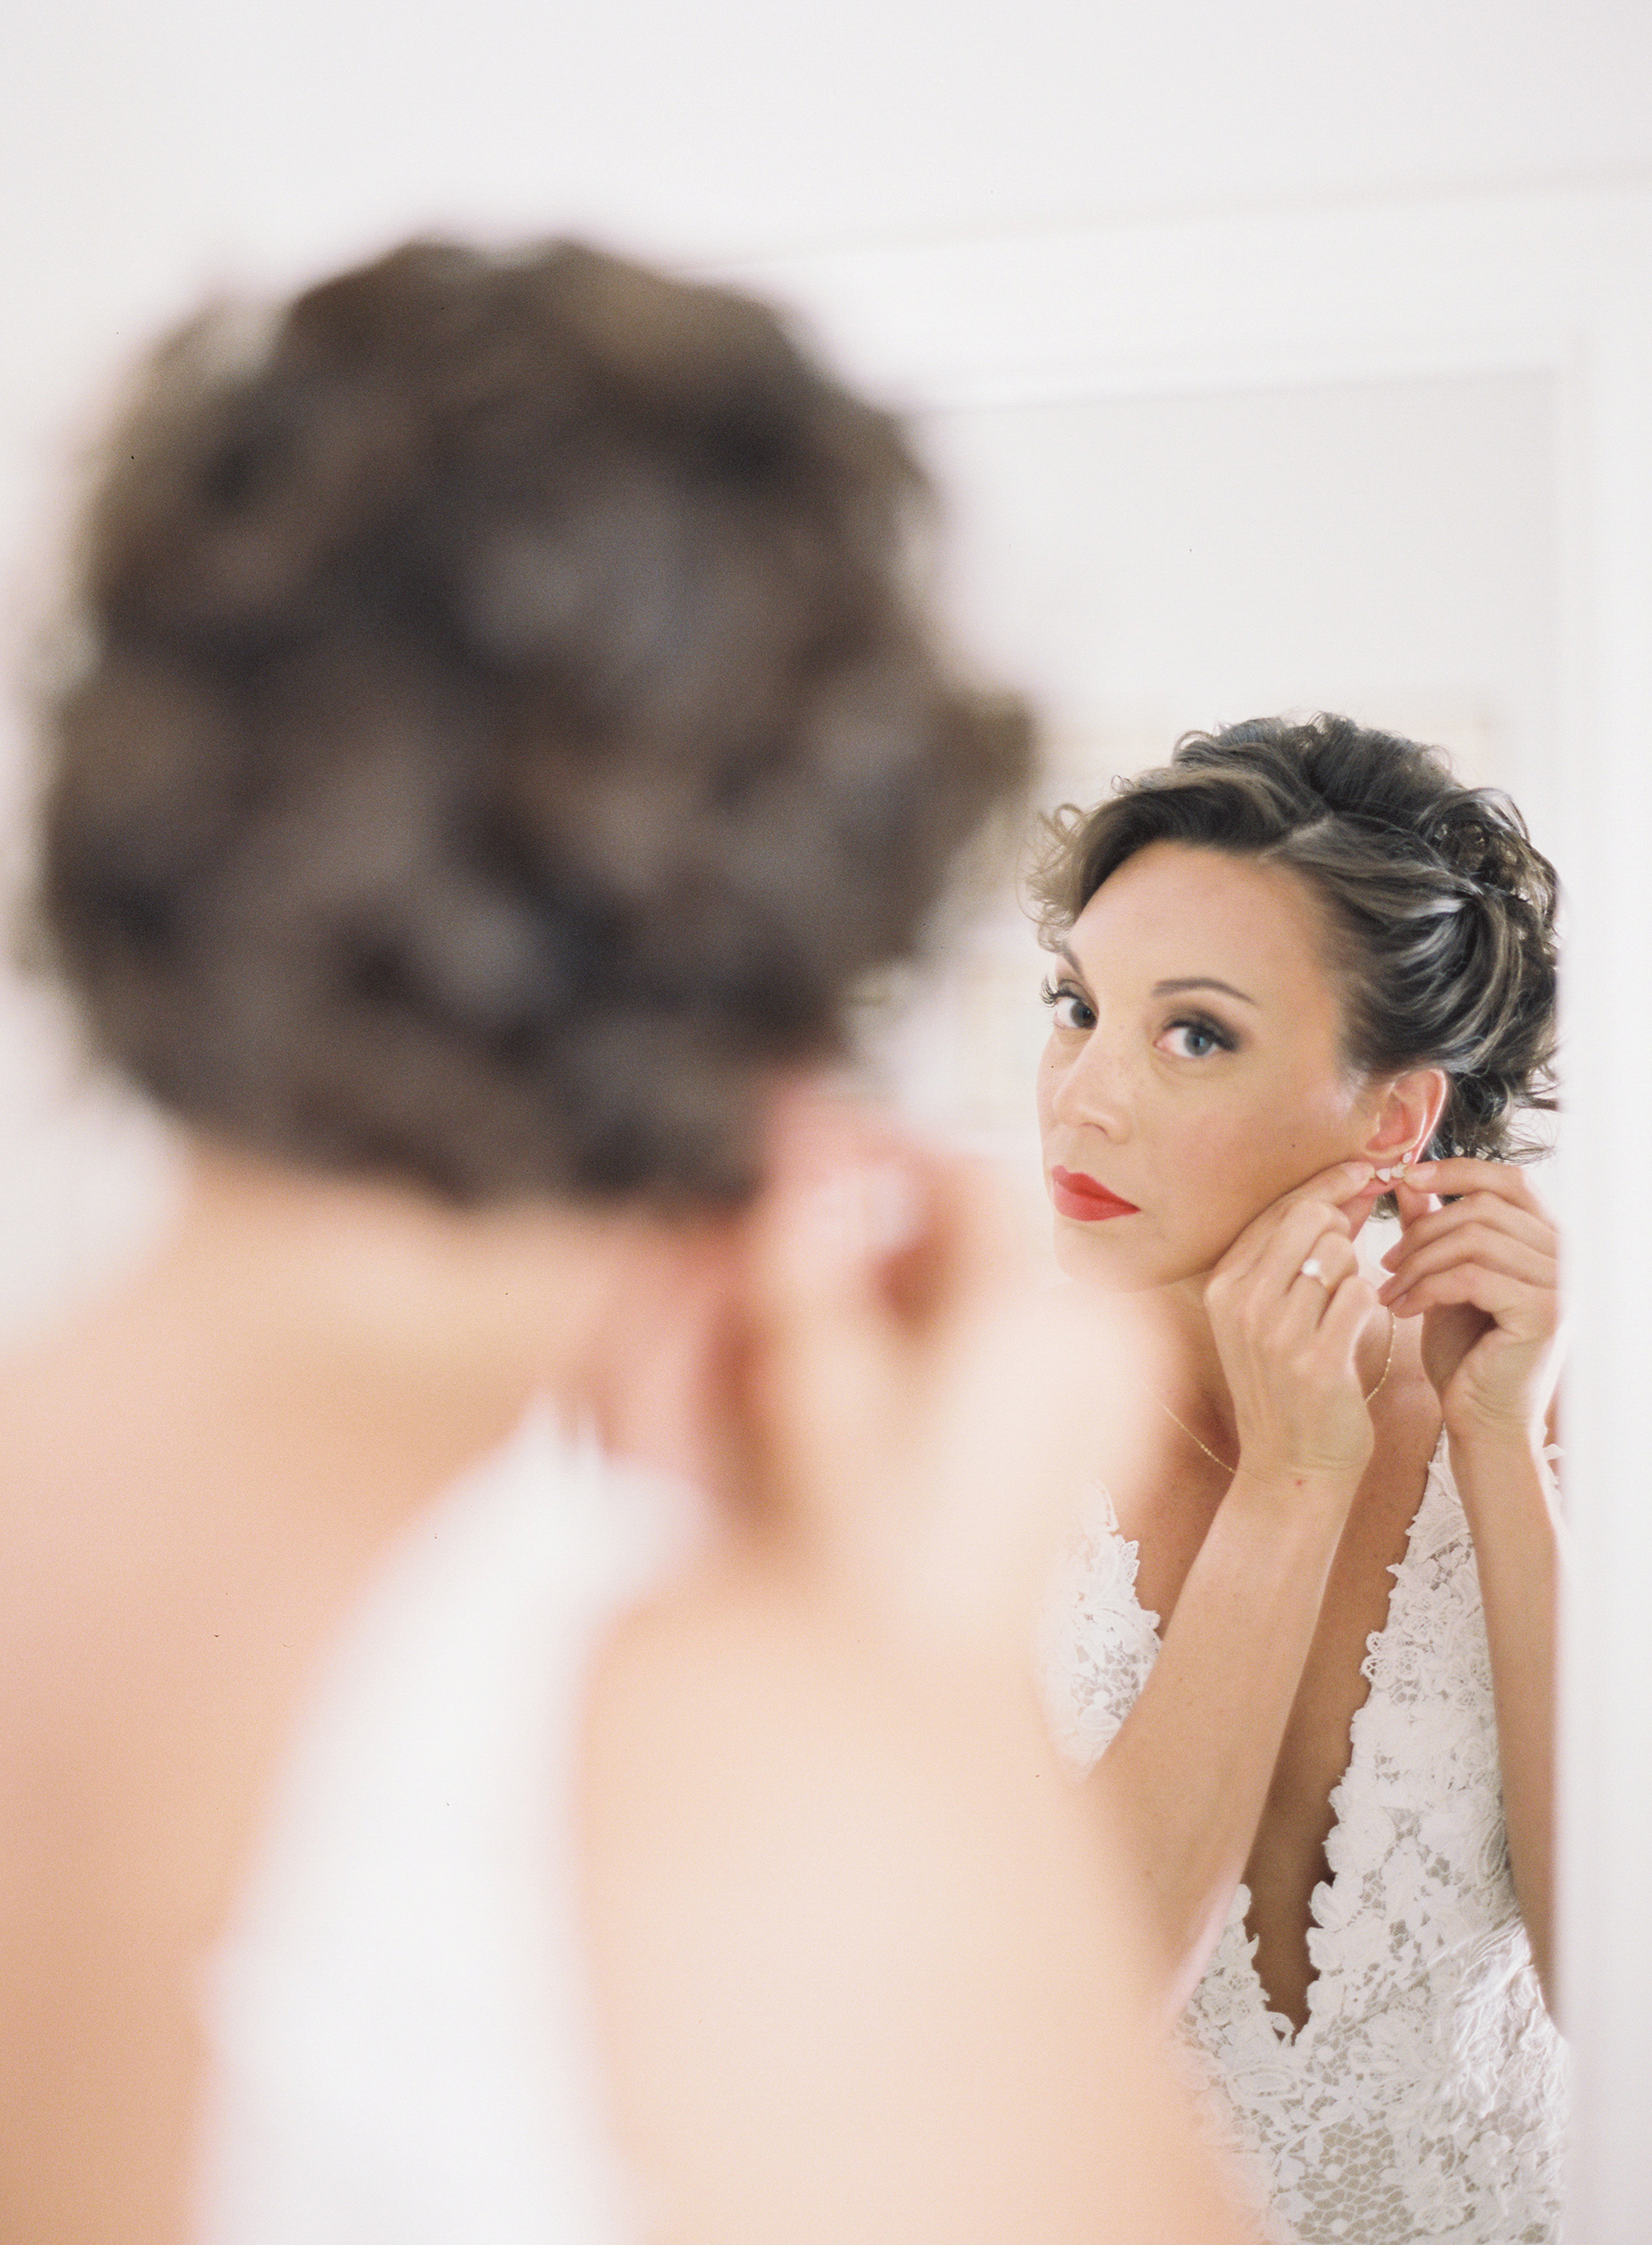 How to feel fabulous on your wedding day